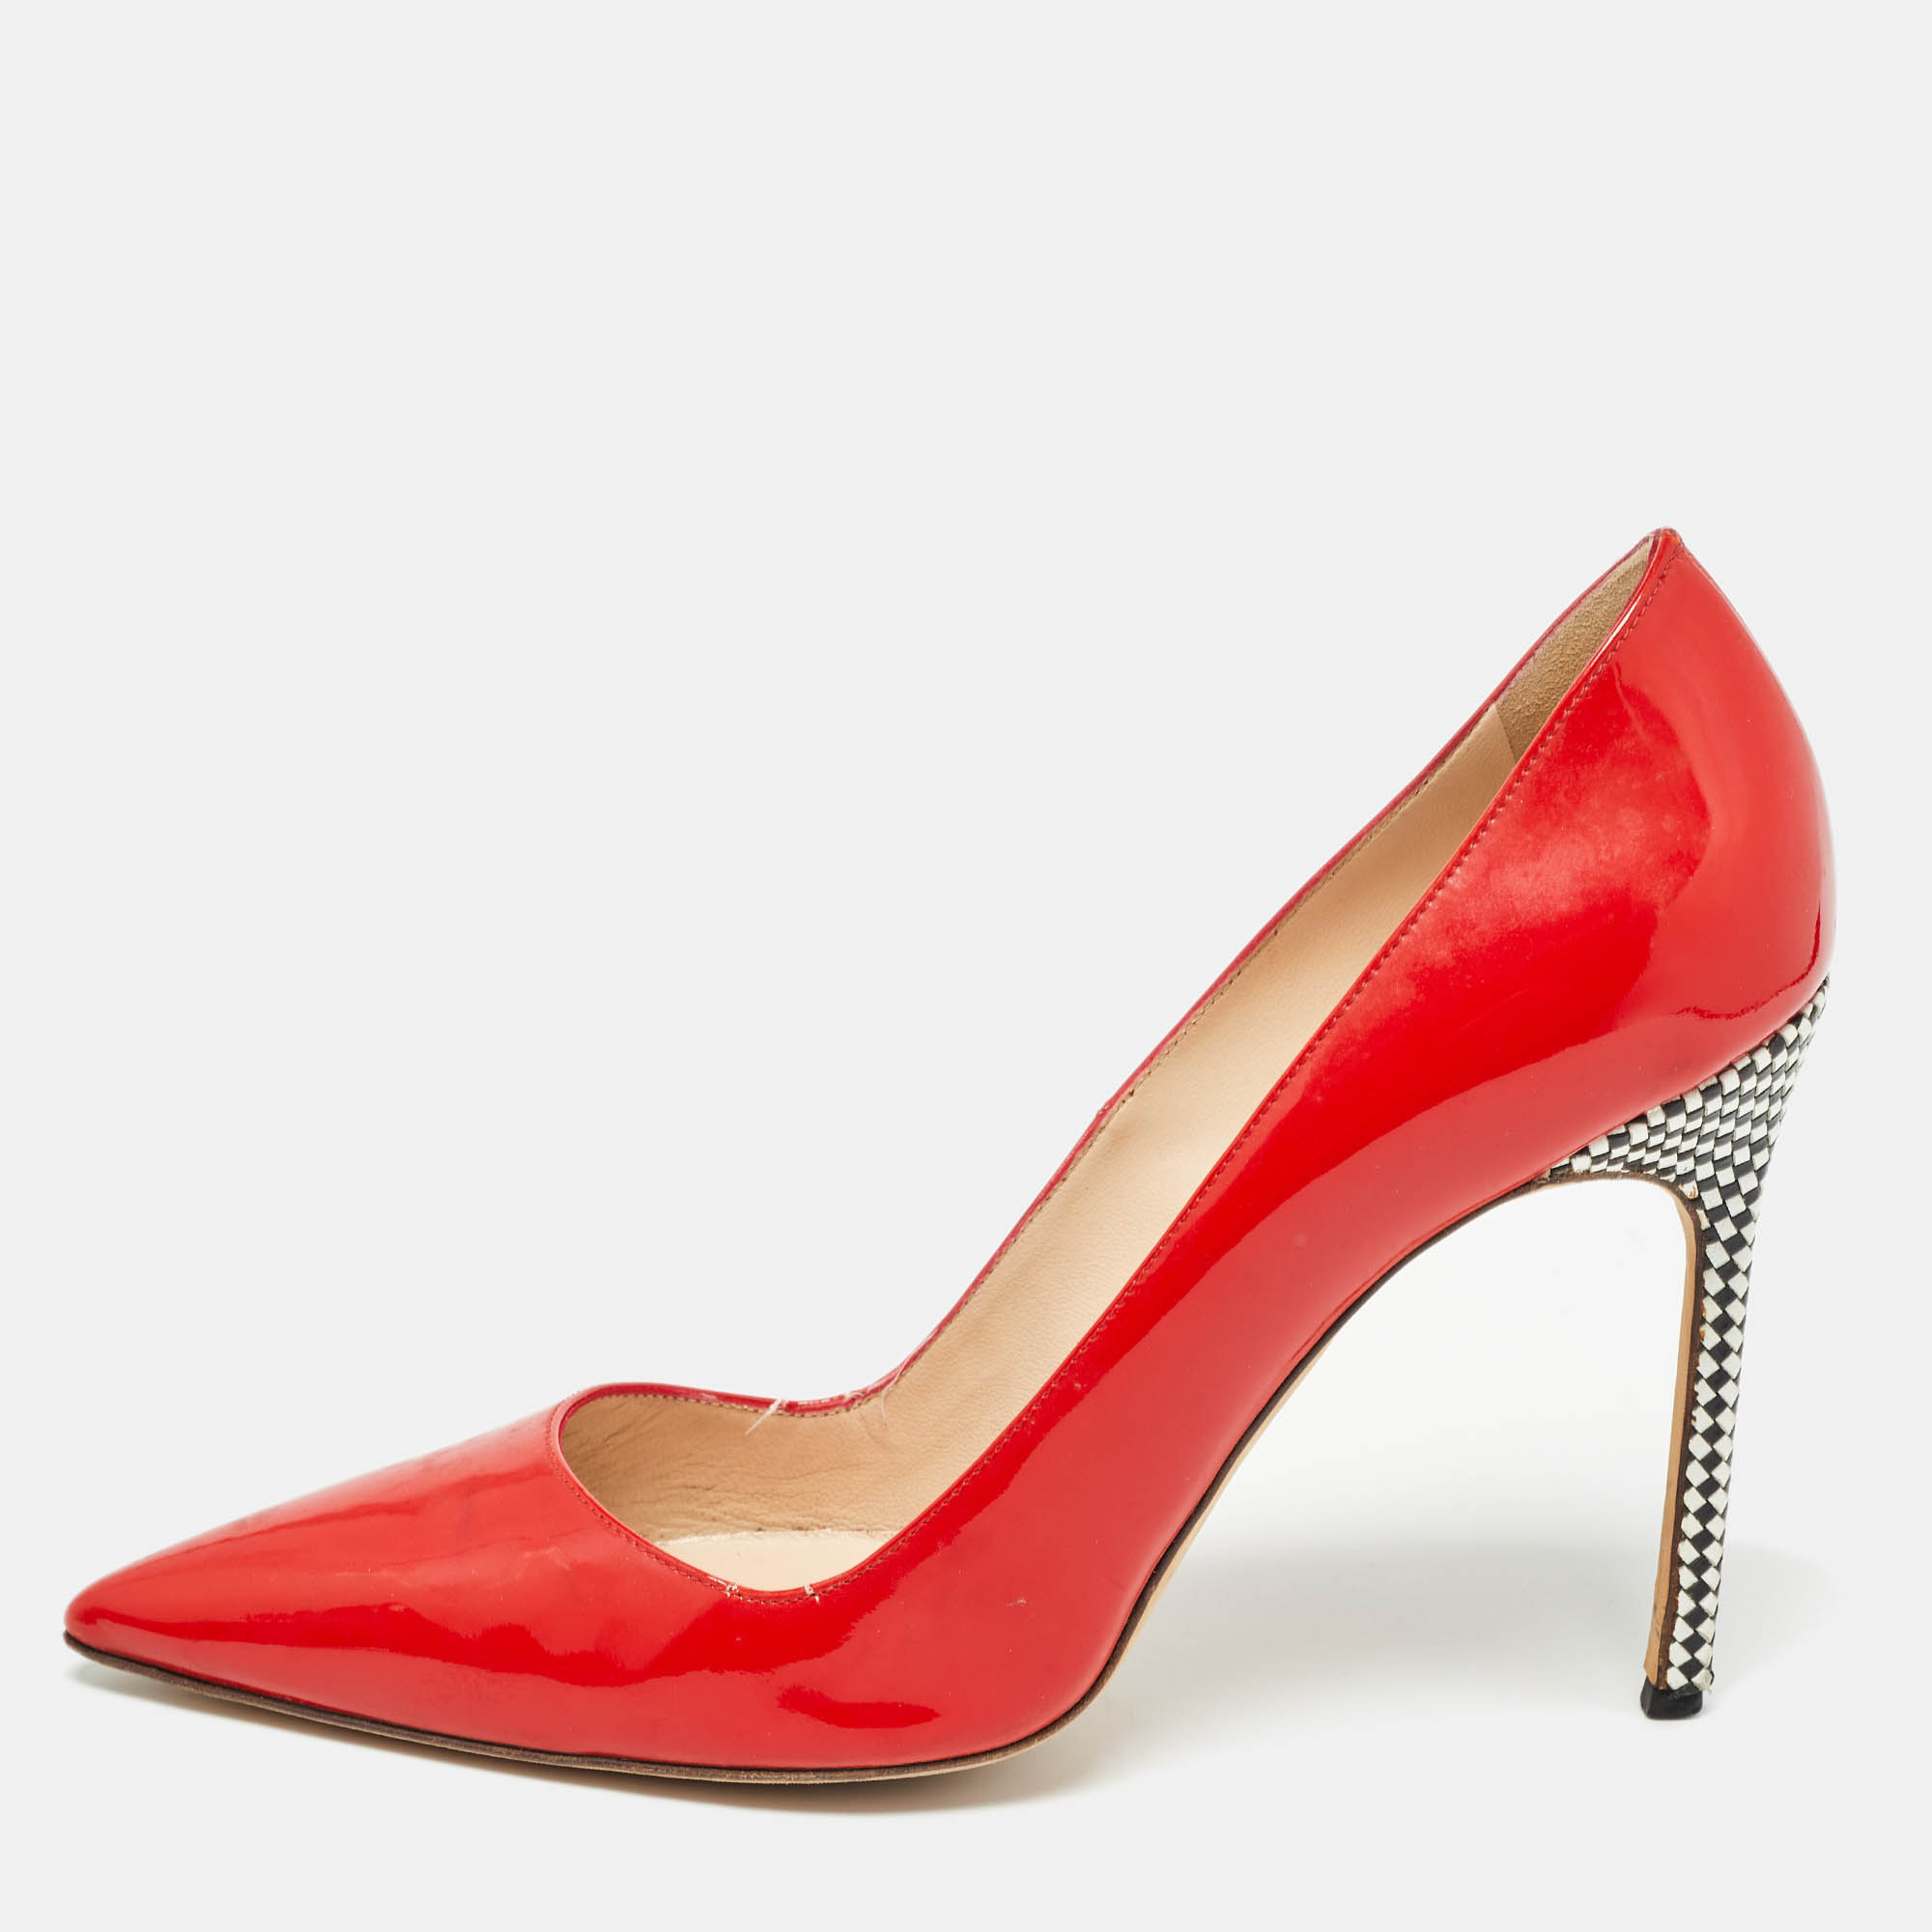 

Manolo Blahnik Red Patent Leather Pointed Toe Pumps Size